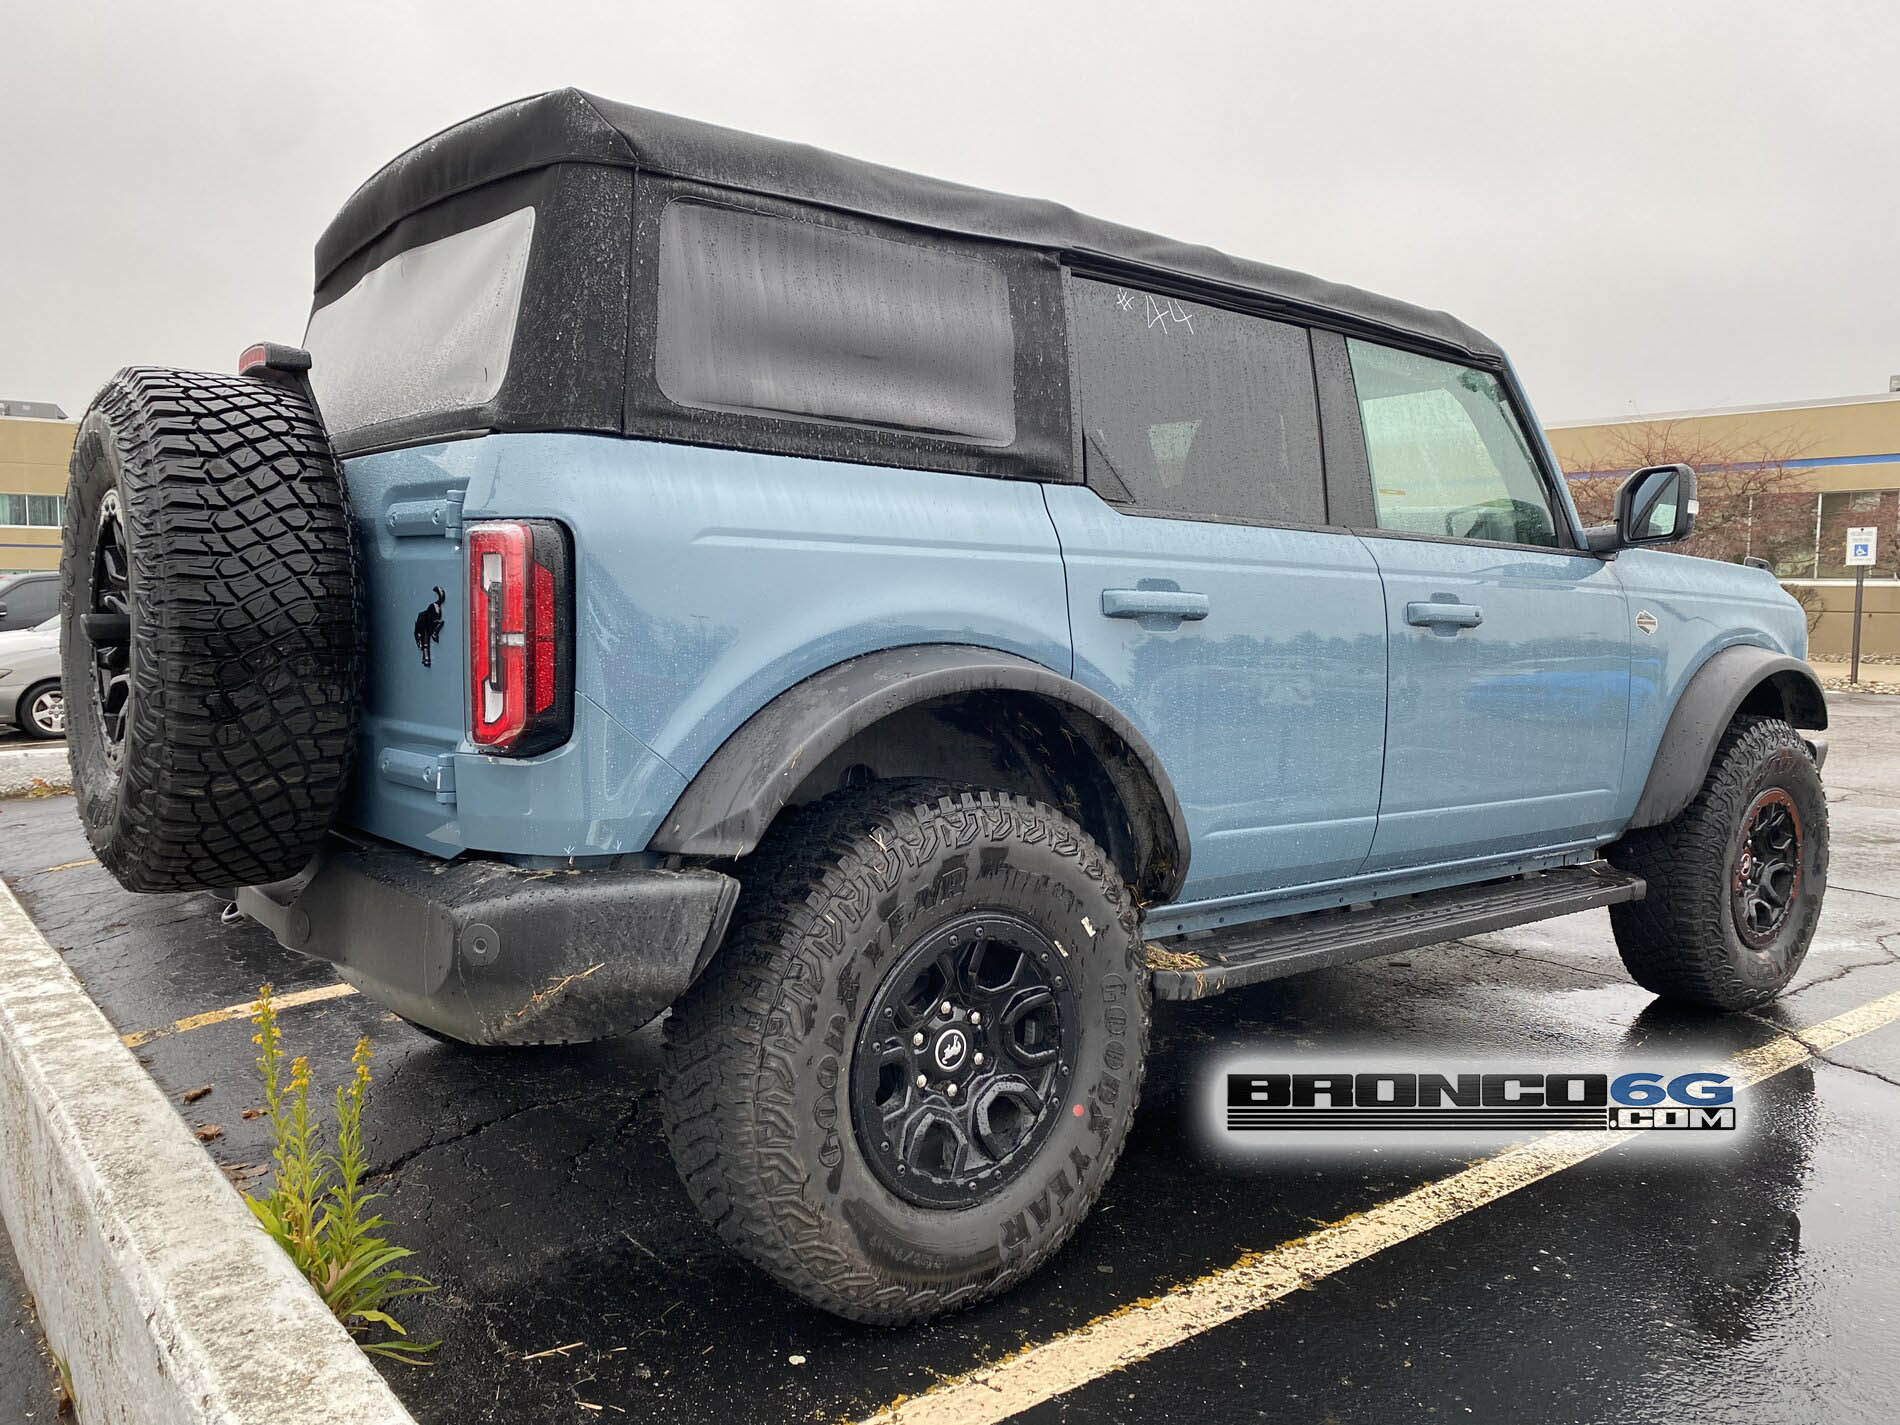 Ford Bronco 4 Door Sasquatch Picture Thread (No CGI, only real pics) 8D80265D-A5DA-48BE-868D-9FCE9AD9130C